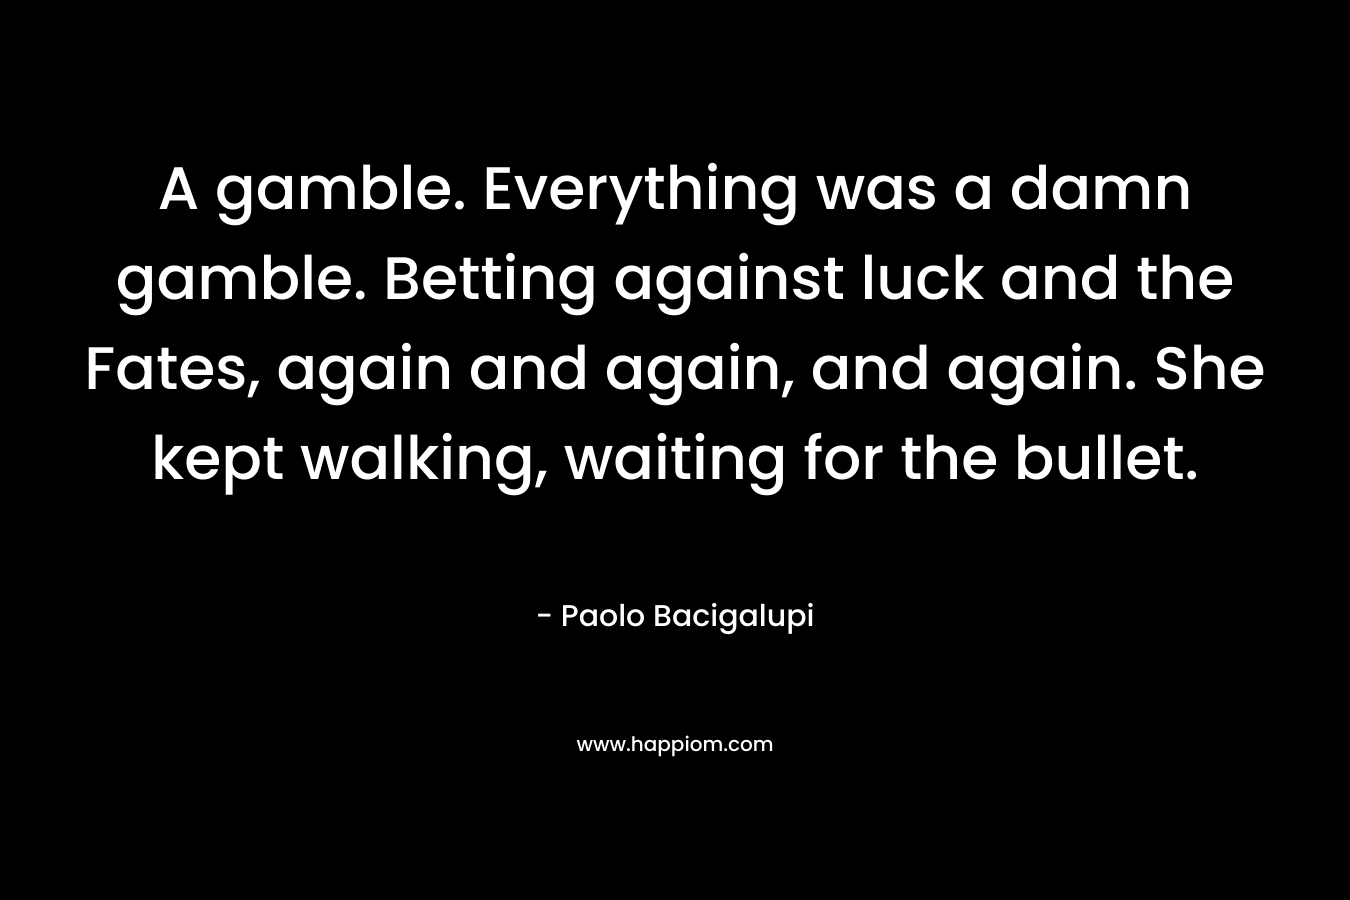 A gamble. Everything was a damn gamble. Betting against luck and the Fates, again and again, and again. She kept walking, waiting for the bullet.